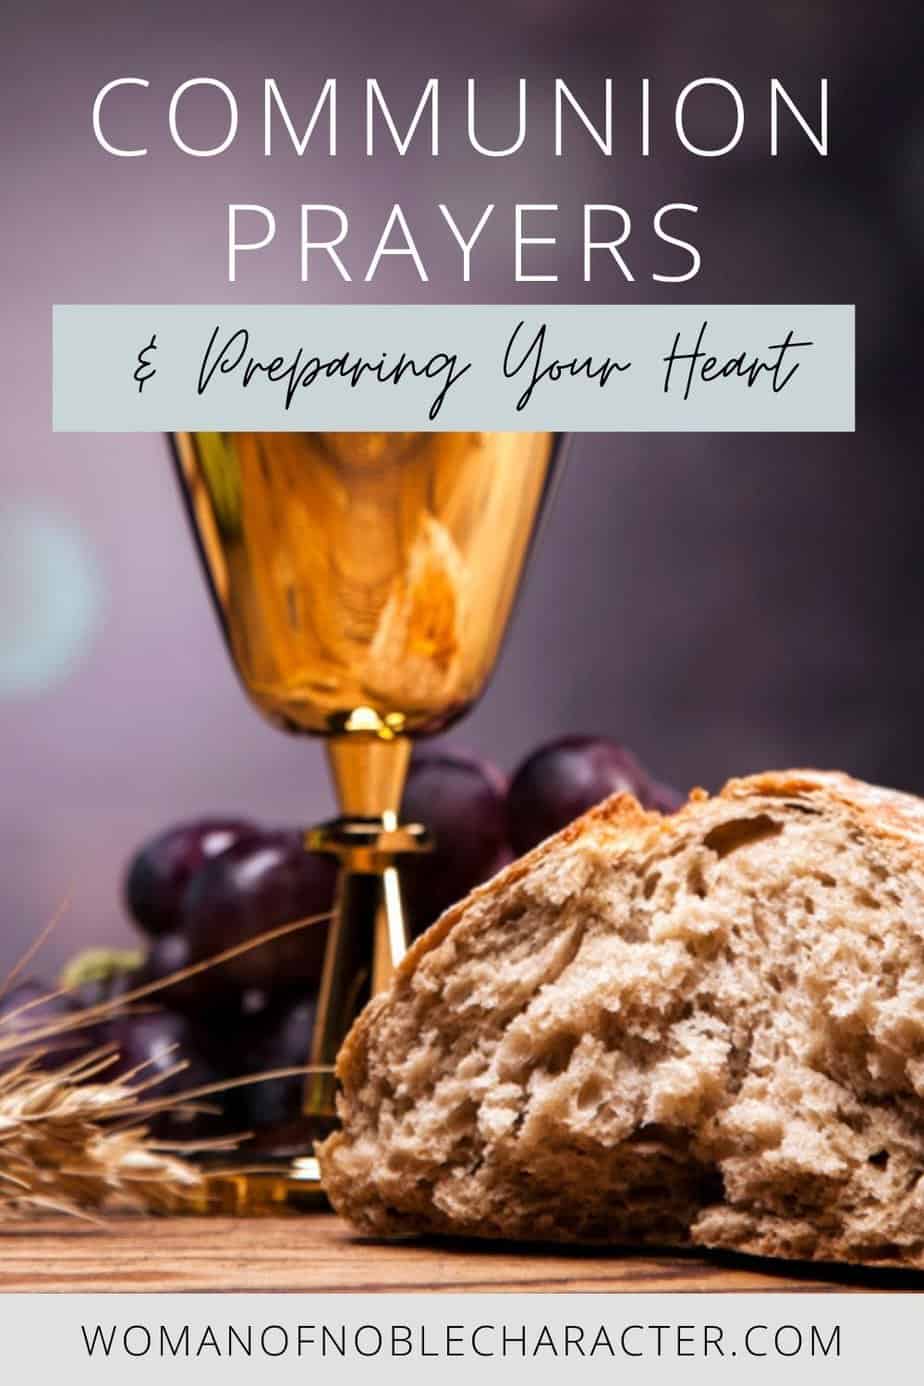 image of chalice and bread with the text Communion prayers and how to prepare your heart